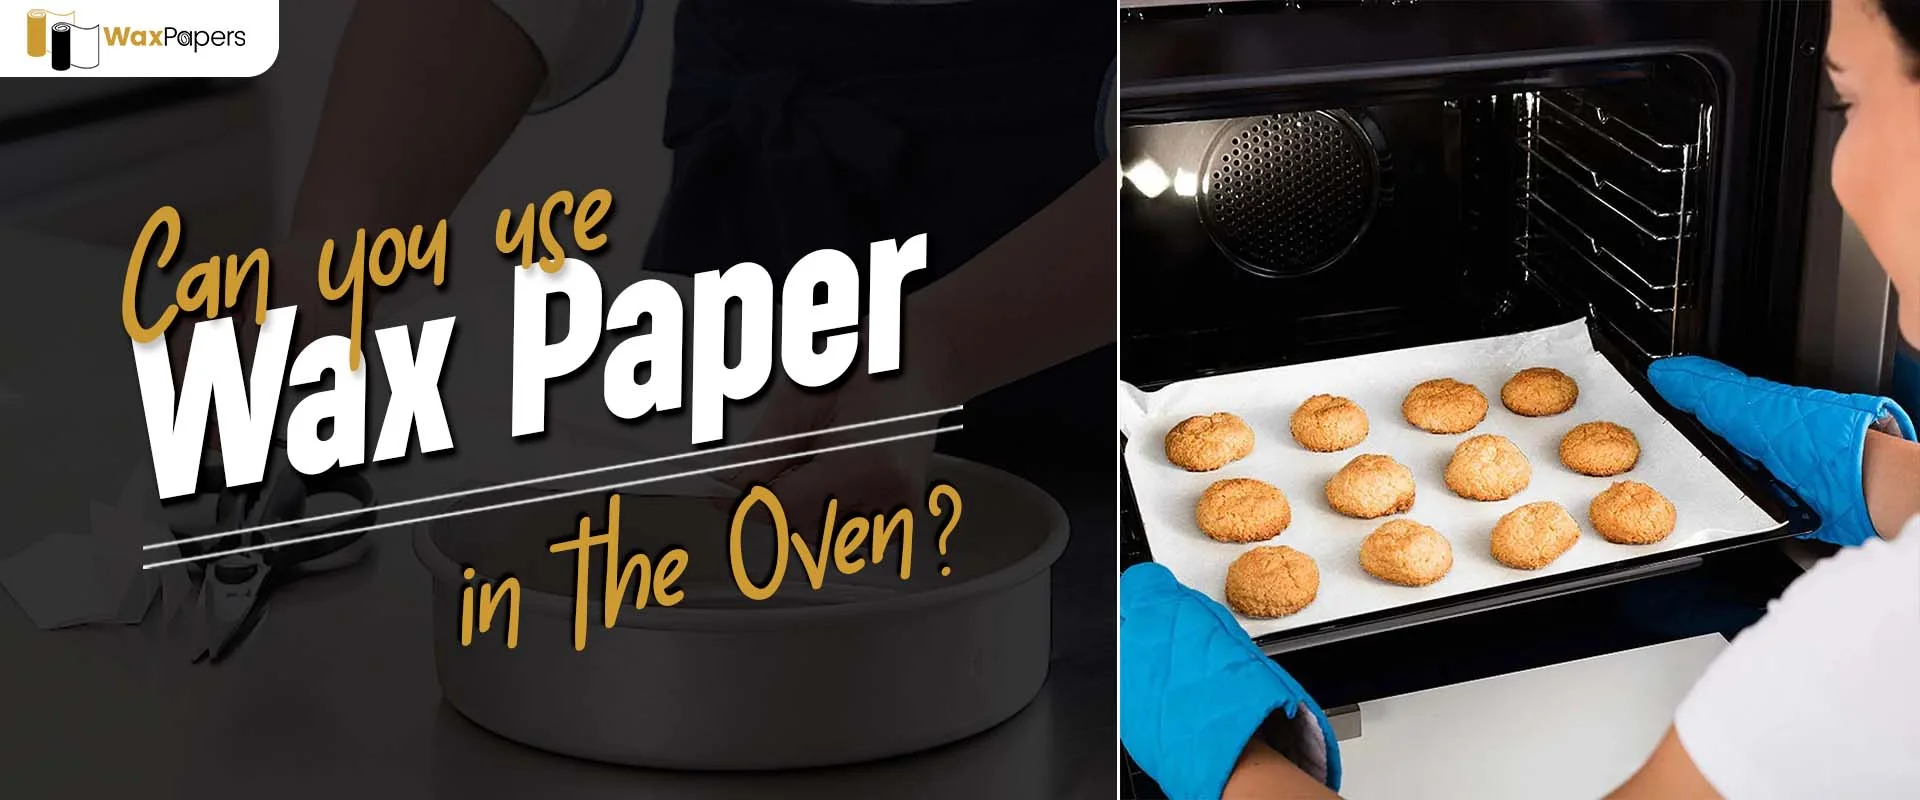 Can You Use Wax Paper In The Oven? Its Uses And Alternatives